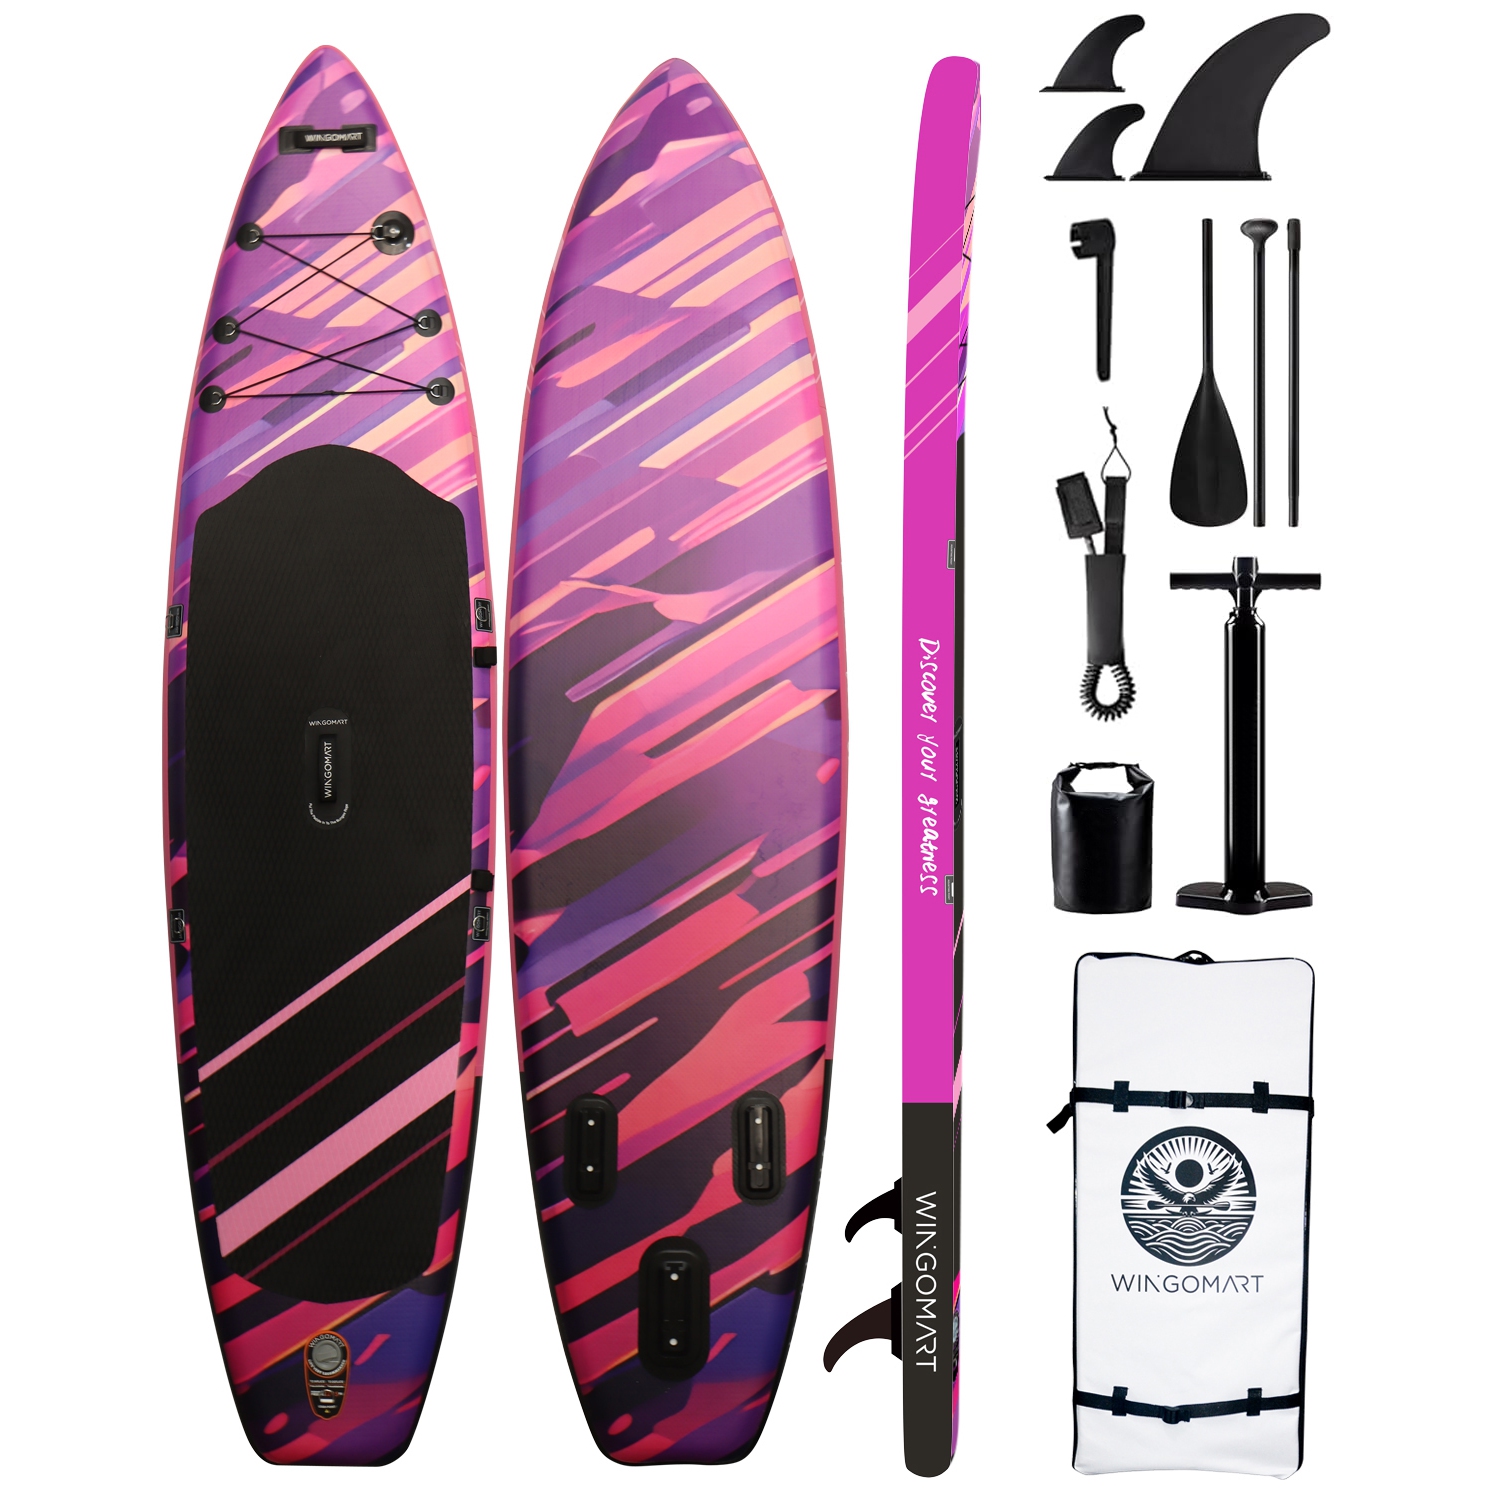 FUSION NEON 11FT x 33" Super Wide Inflatable Stand Up Paddle Board, Ultra Stable Wide SUP Up to 2 people/375LB Fully equipped w/ Premium SUP Accessories